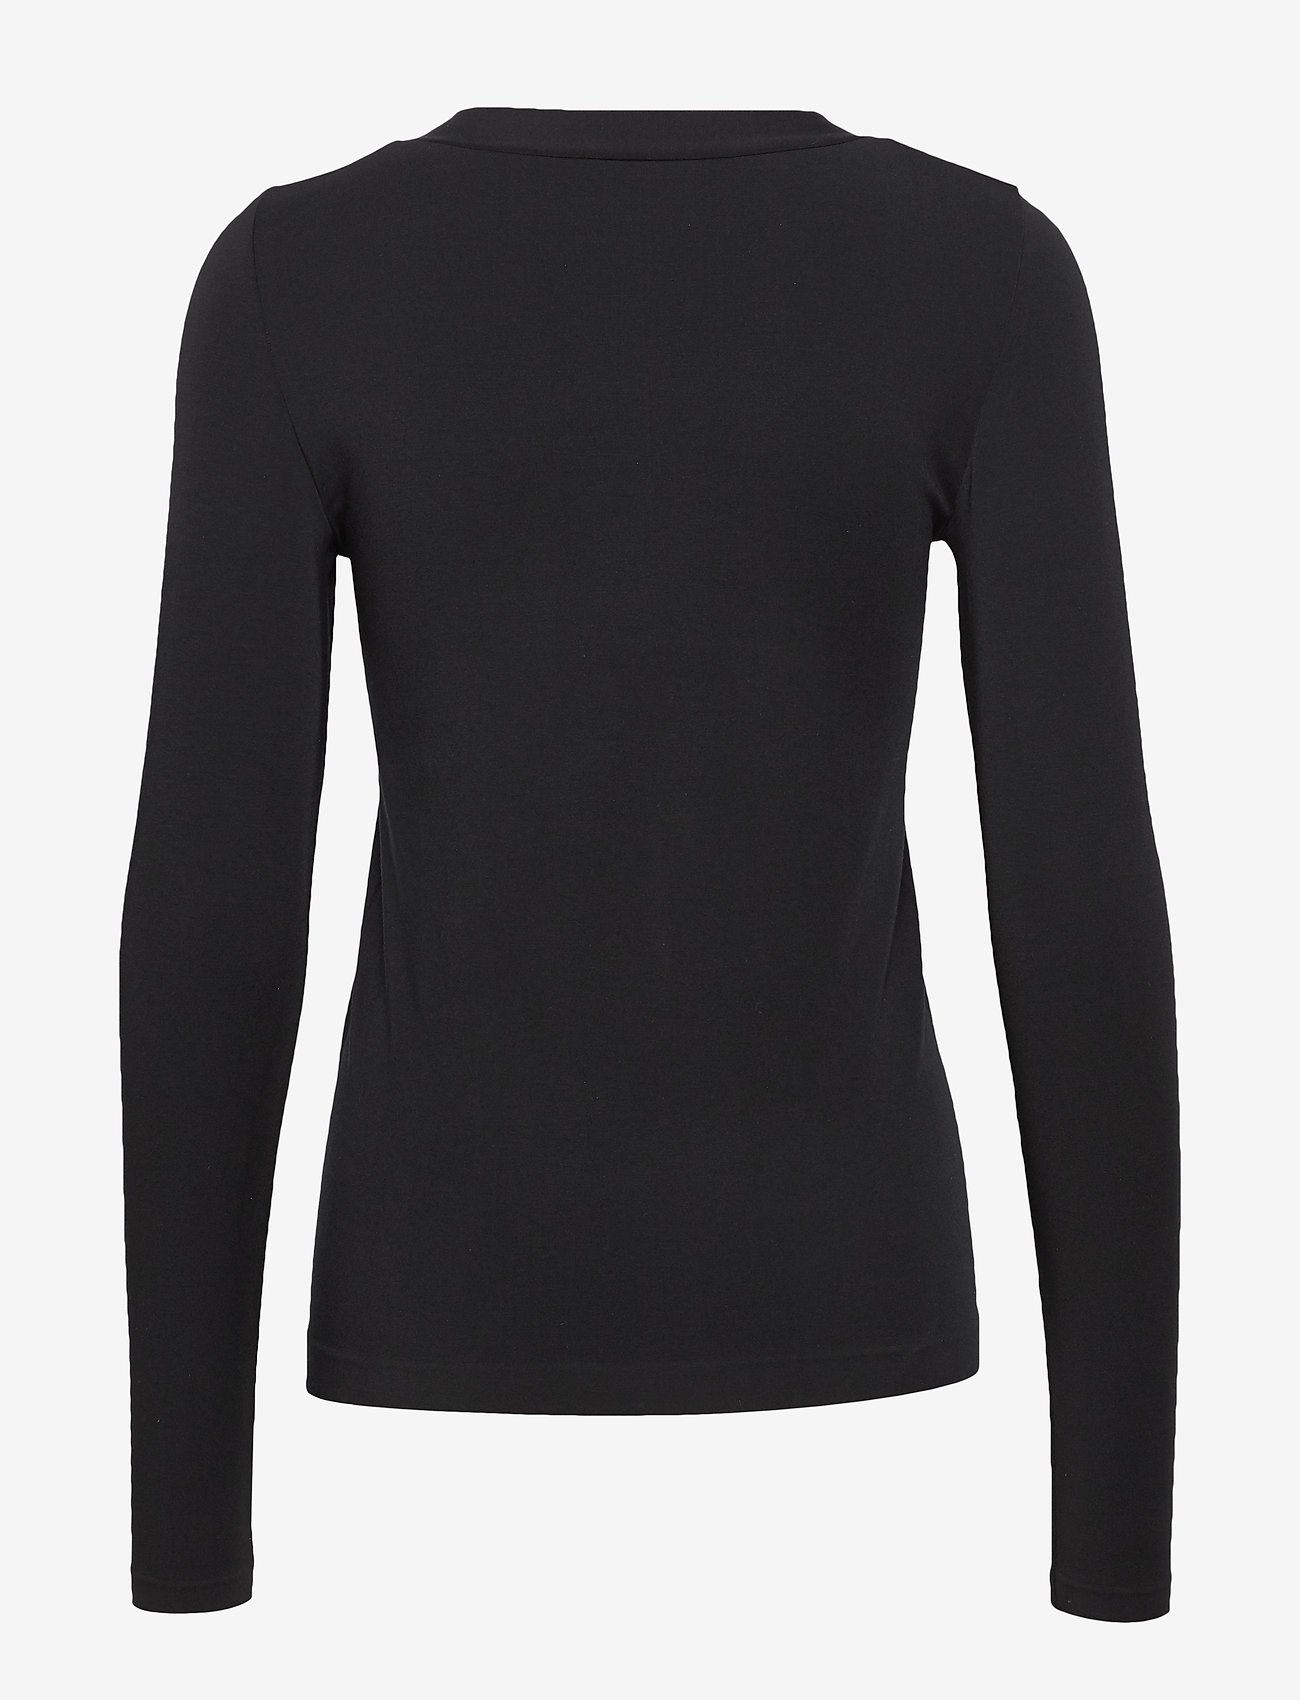 Wolford - Aurora Pullover - sweaters - black - 1